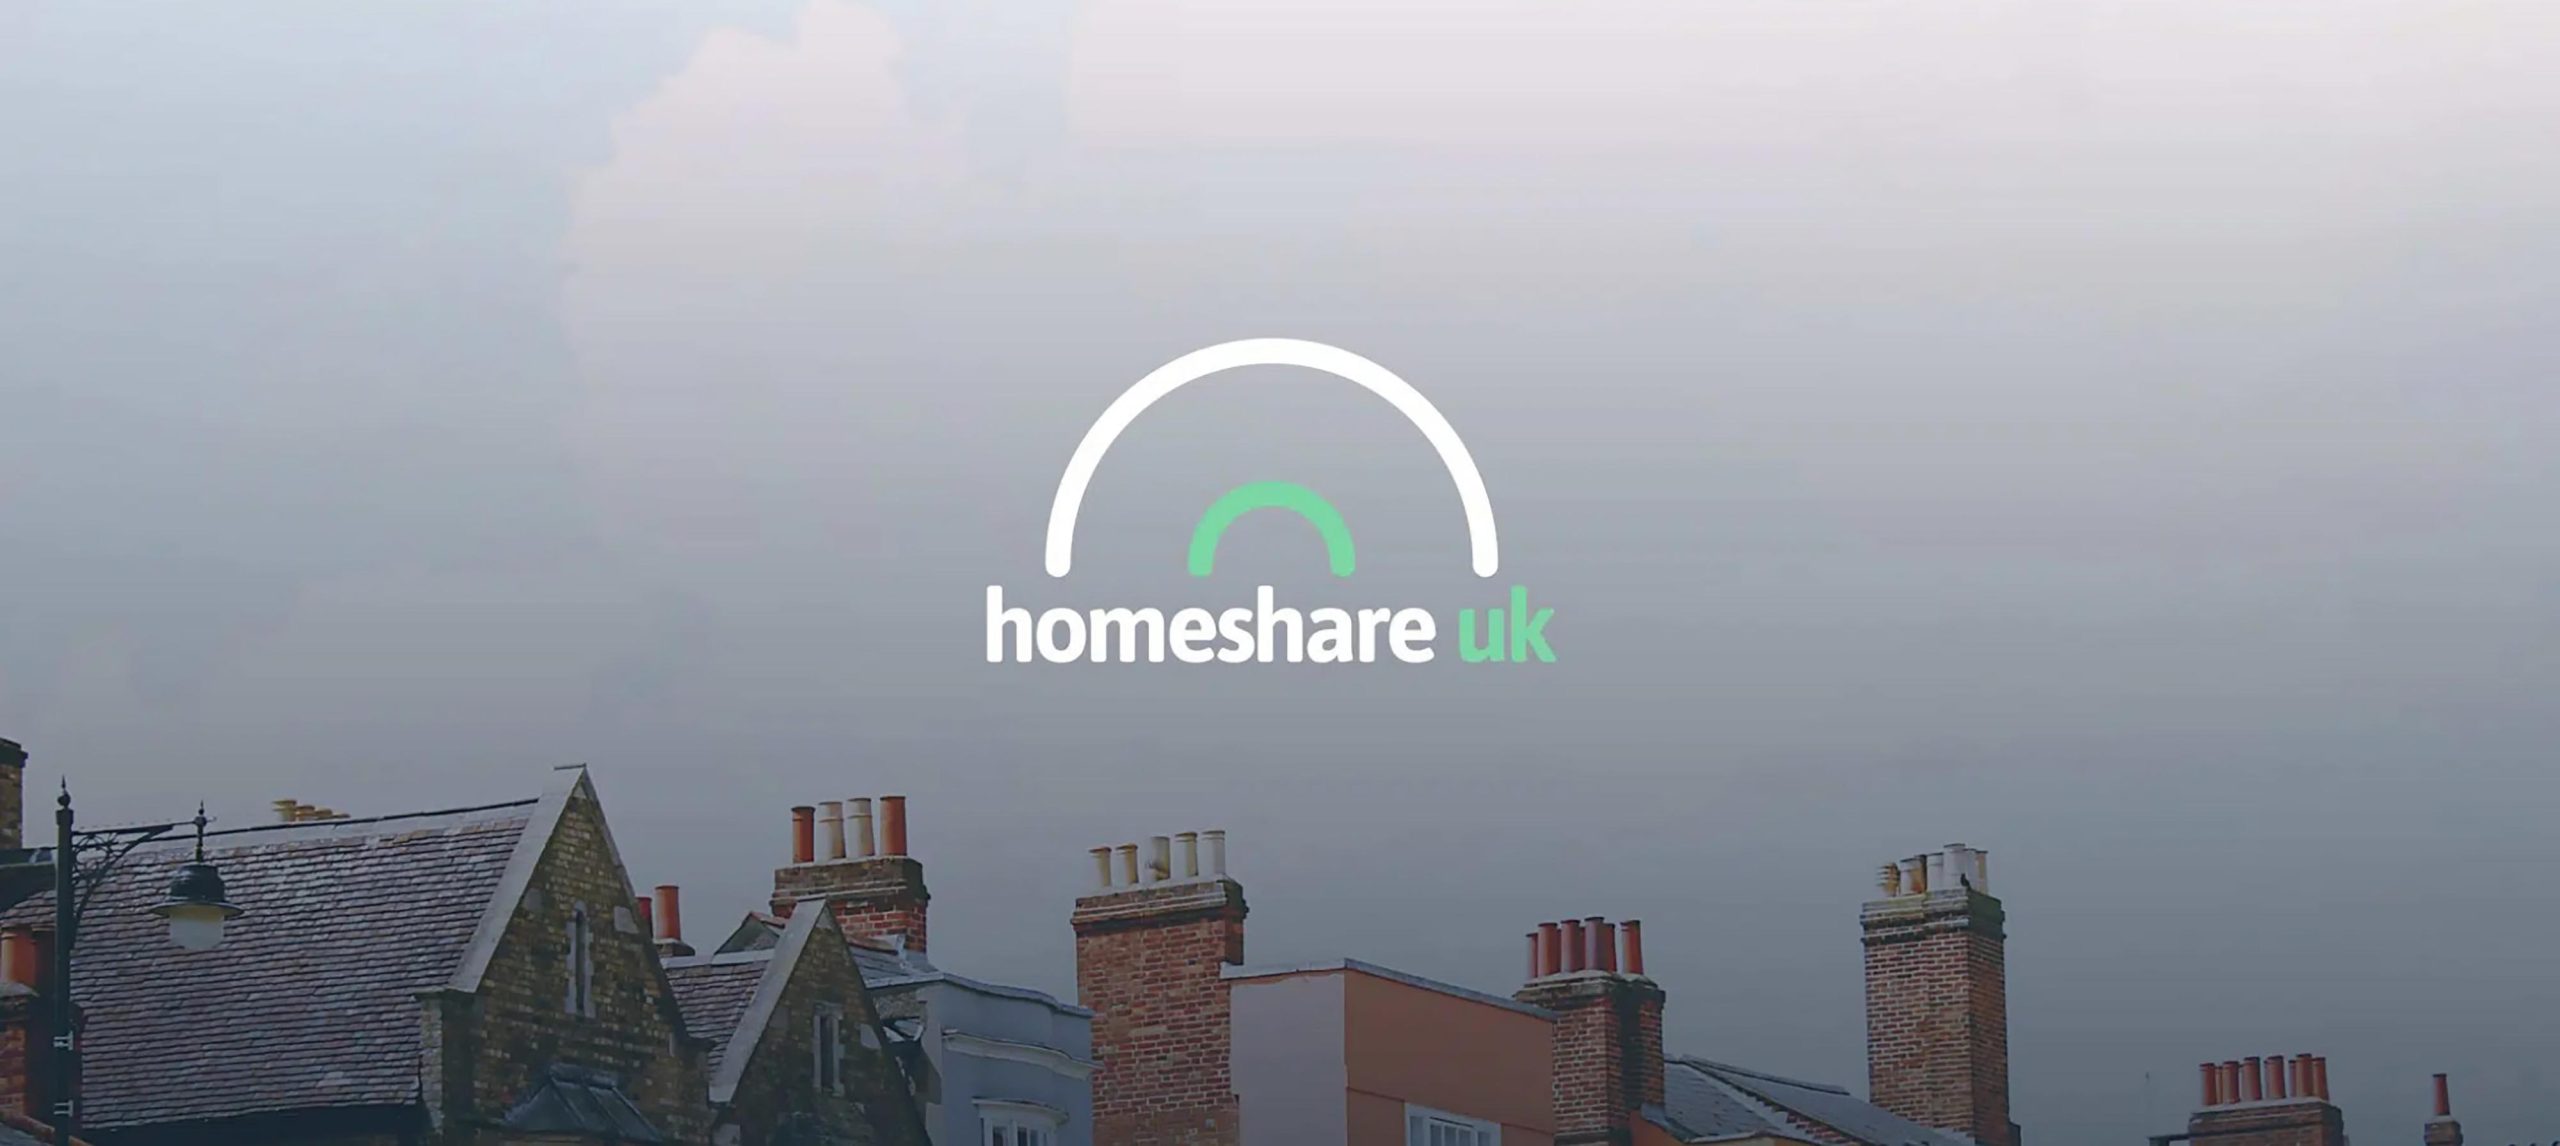 The hero image for Homeshare UK, a project of Liverpool based design agency, Hopeful Studio.